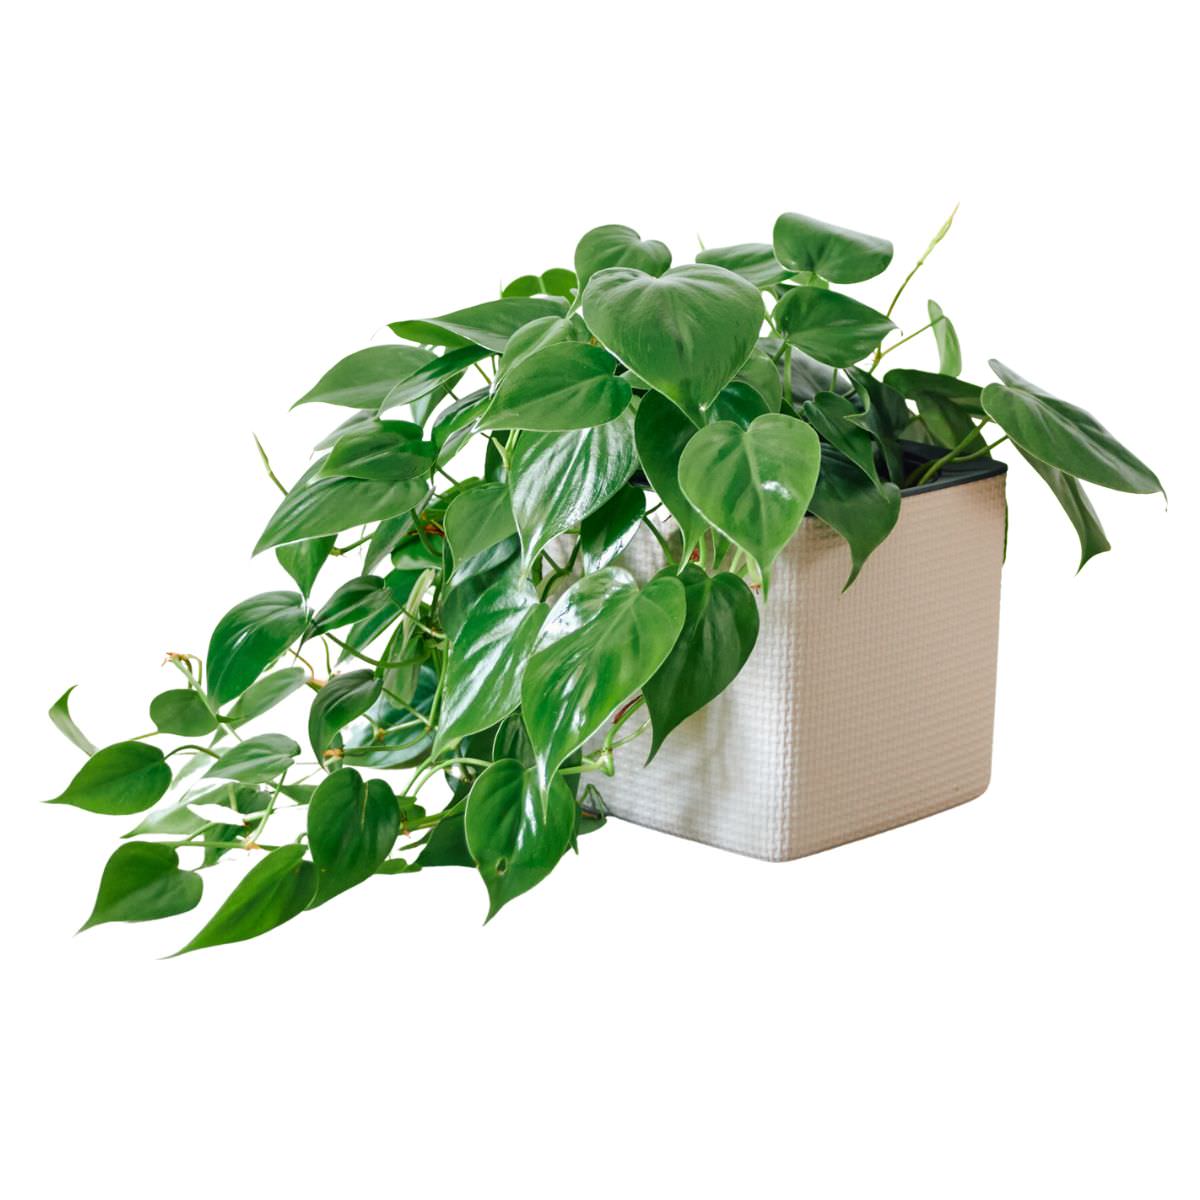 Philodendron Cordatum Placed In Lechuza Cube 16 planter - Sand Brown - My City Plants